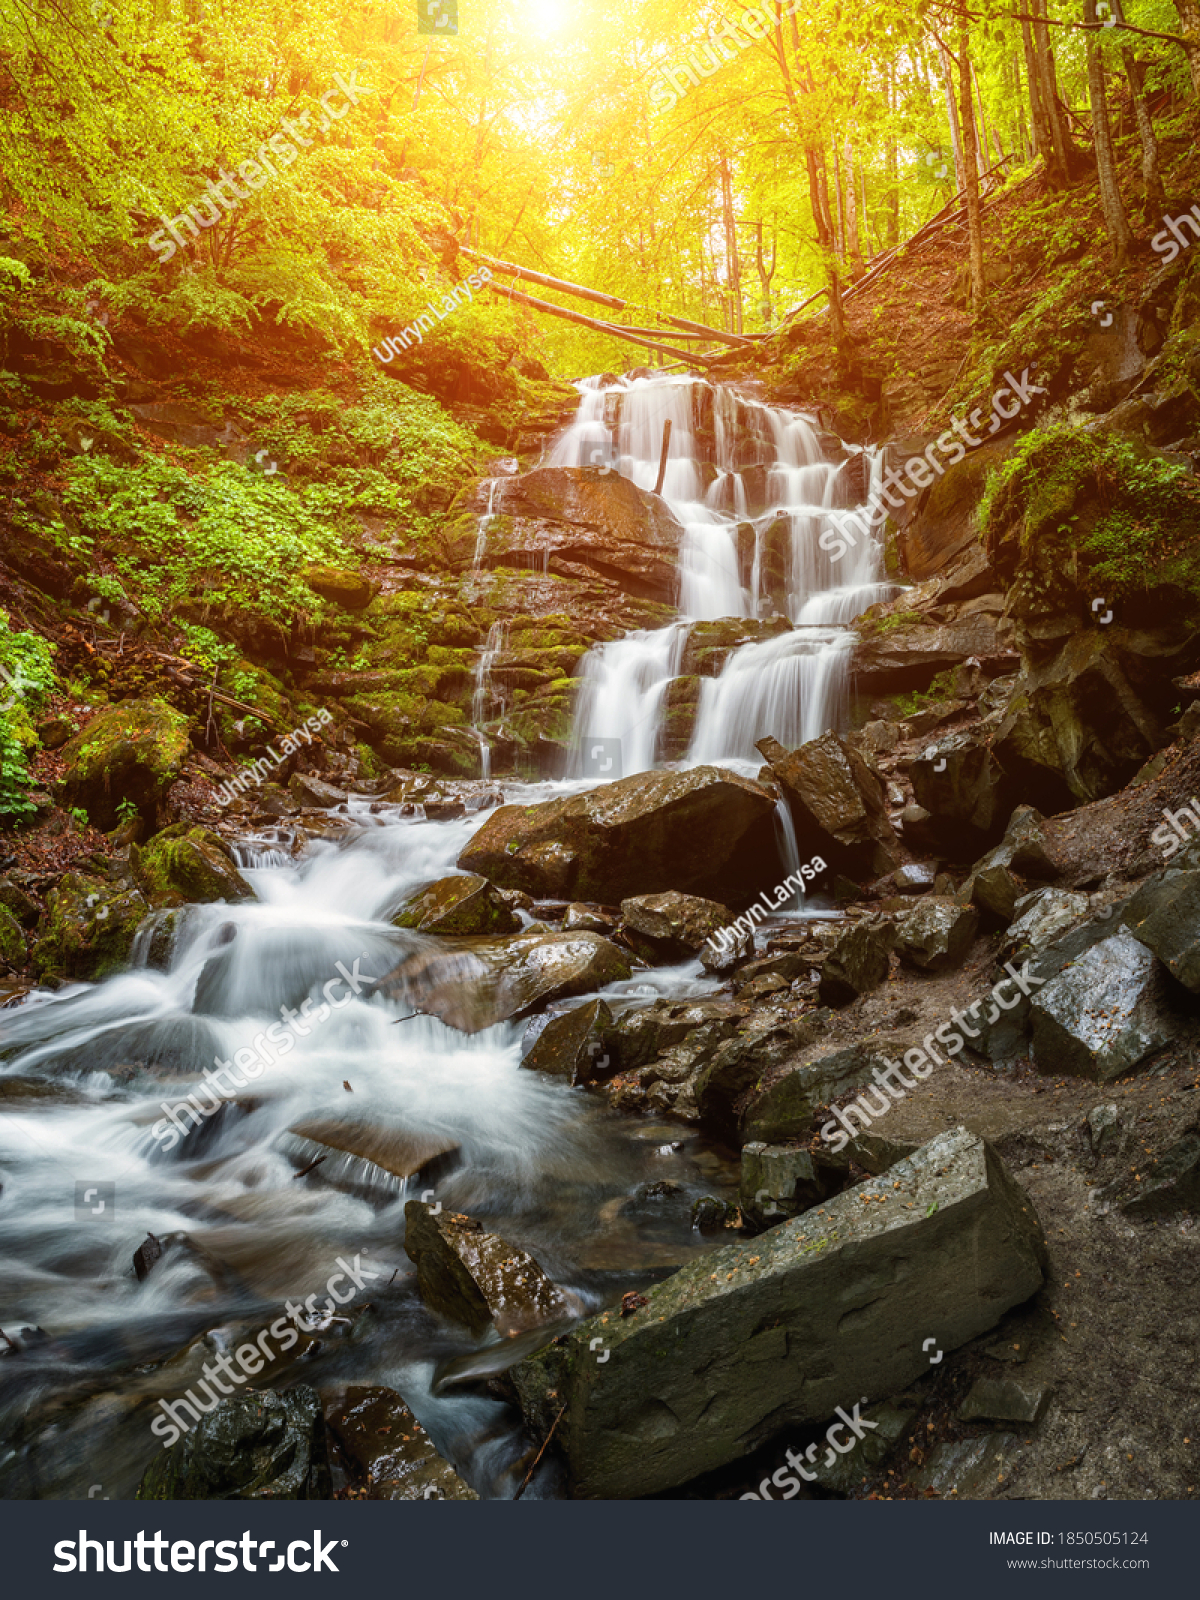 Amazing sunny summer landscape with beautiful Shypit waterfall in Carpathian mountains, popular tourist attraction, nature travel background suitable for wallpaper or cover, vertical image #1850505124